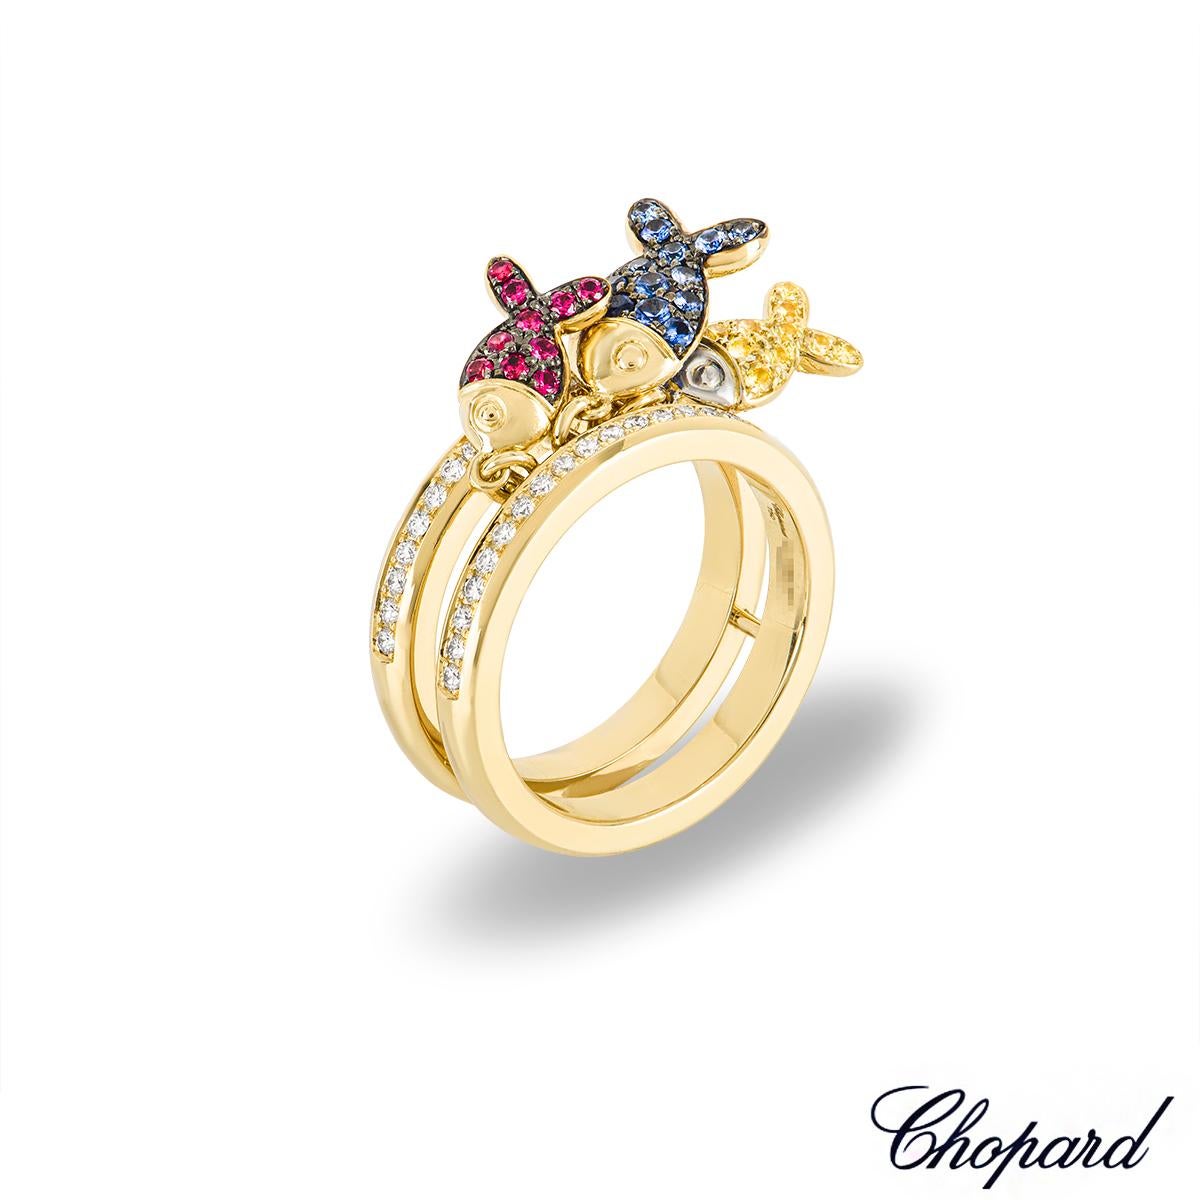 A unique 18k yellow gold dress ring by Chopard. The ring comprises of two 3mm bands evenly separated by 5 bars between them. The bands are each pave set with 20 round brilliant cut diamonds with a total weight of 0.40ct. Adorning the centre of the